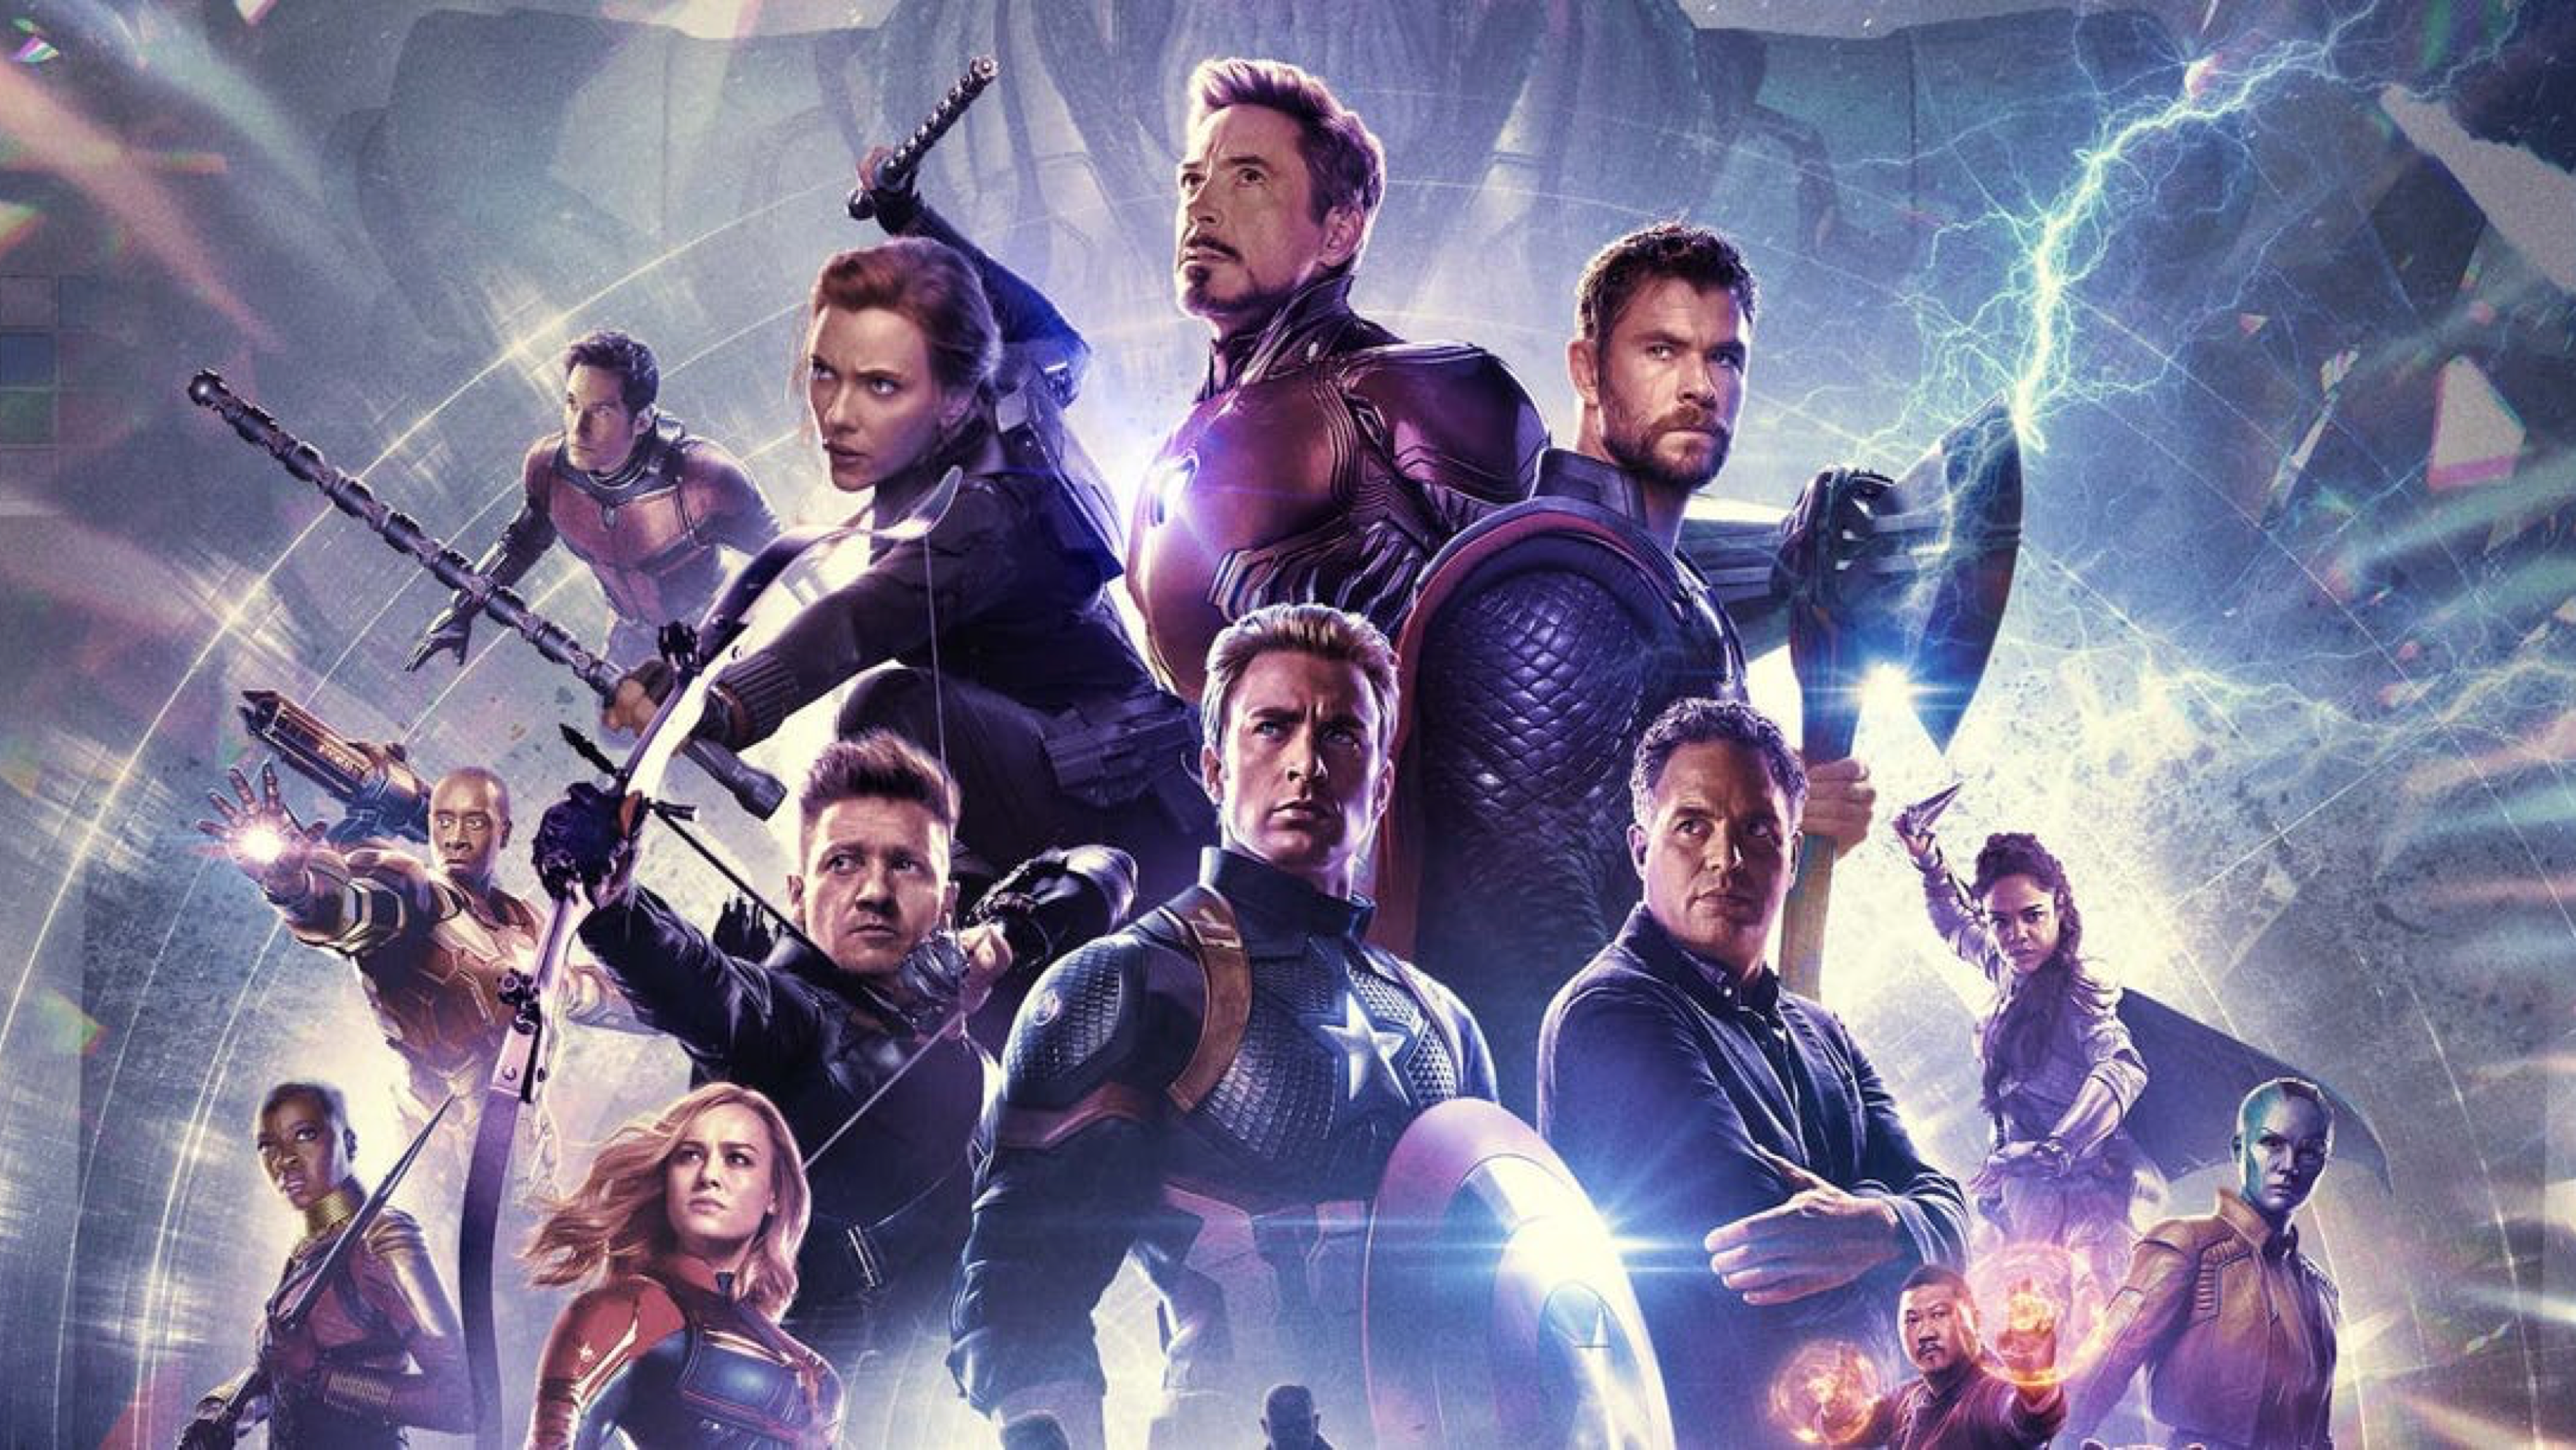 Avengers: Endgame Is Returning to Theaters With Bonus Content